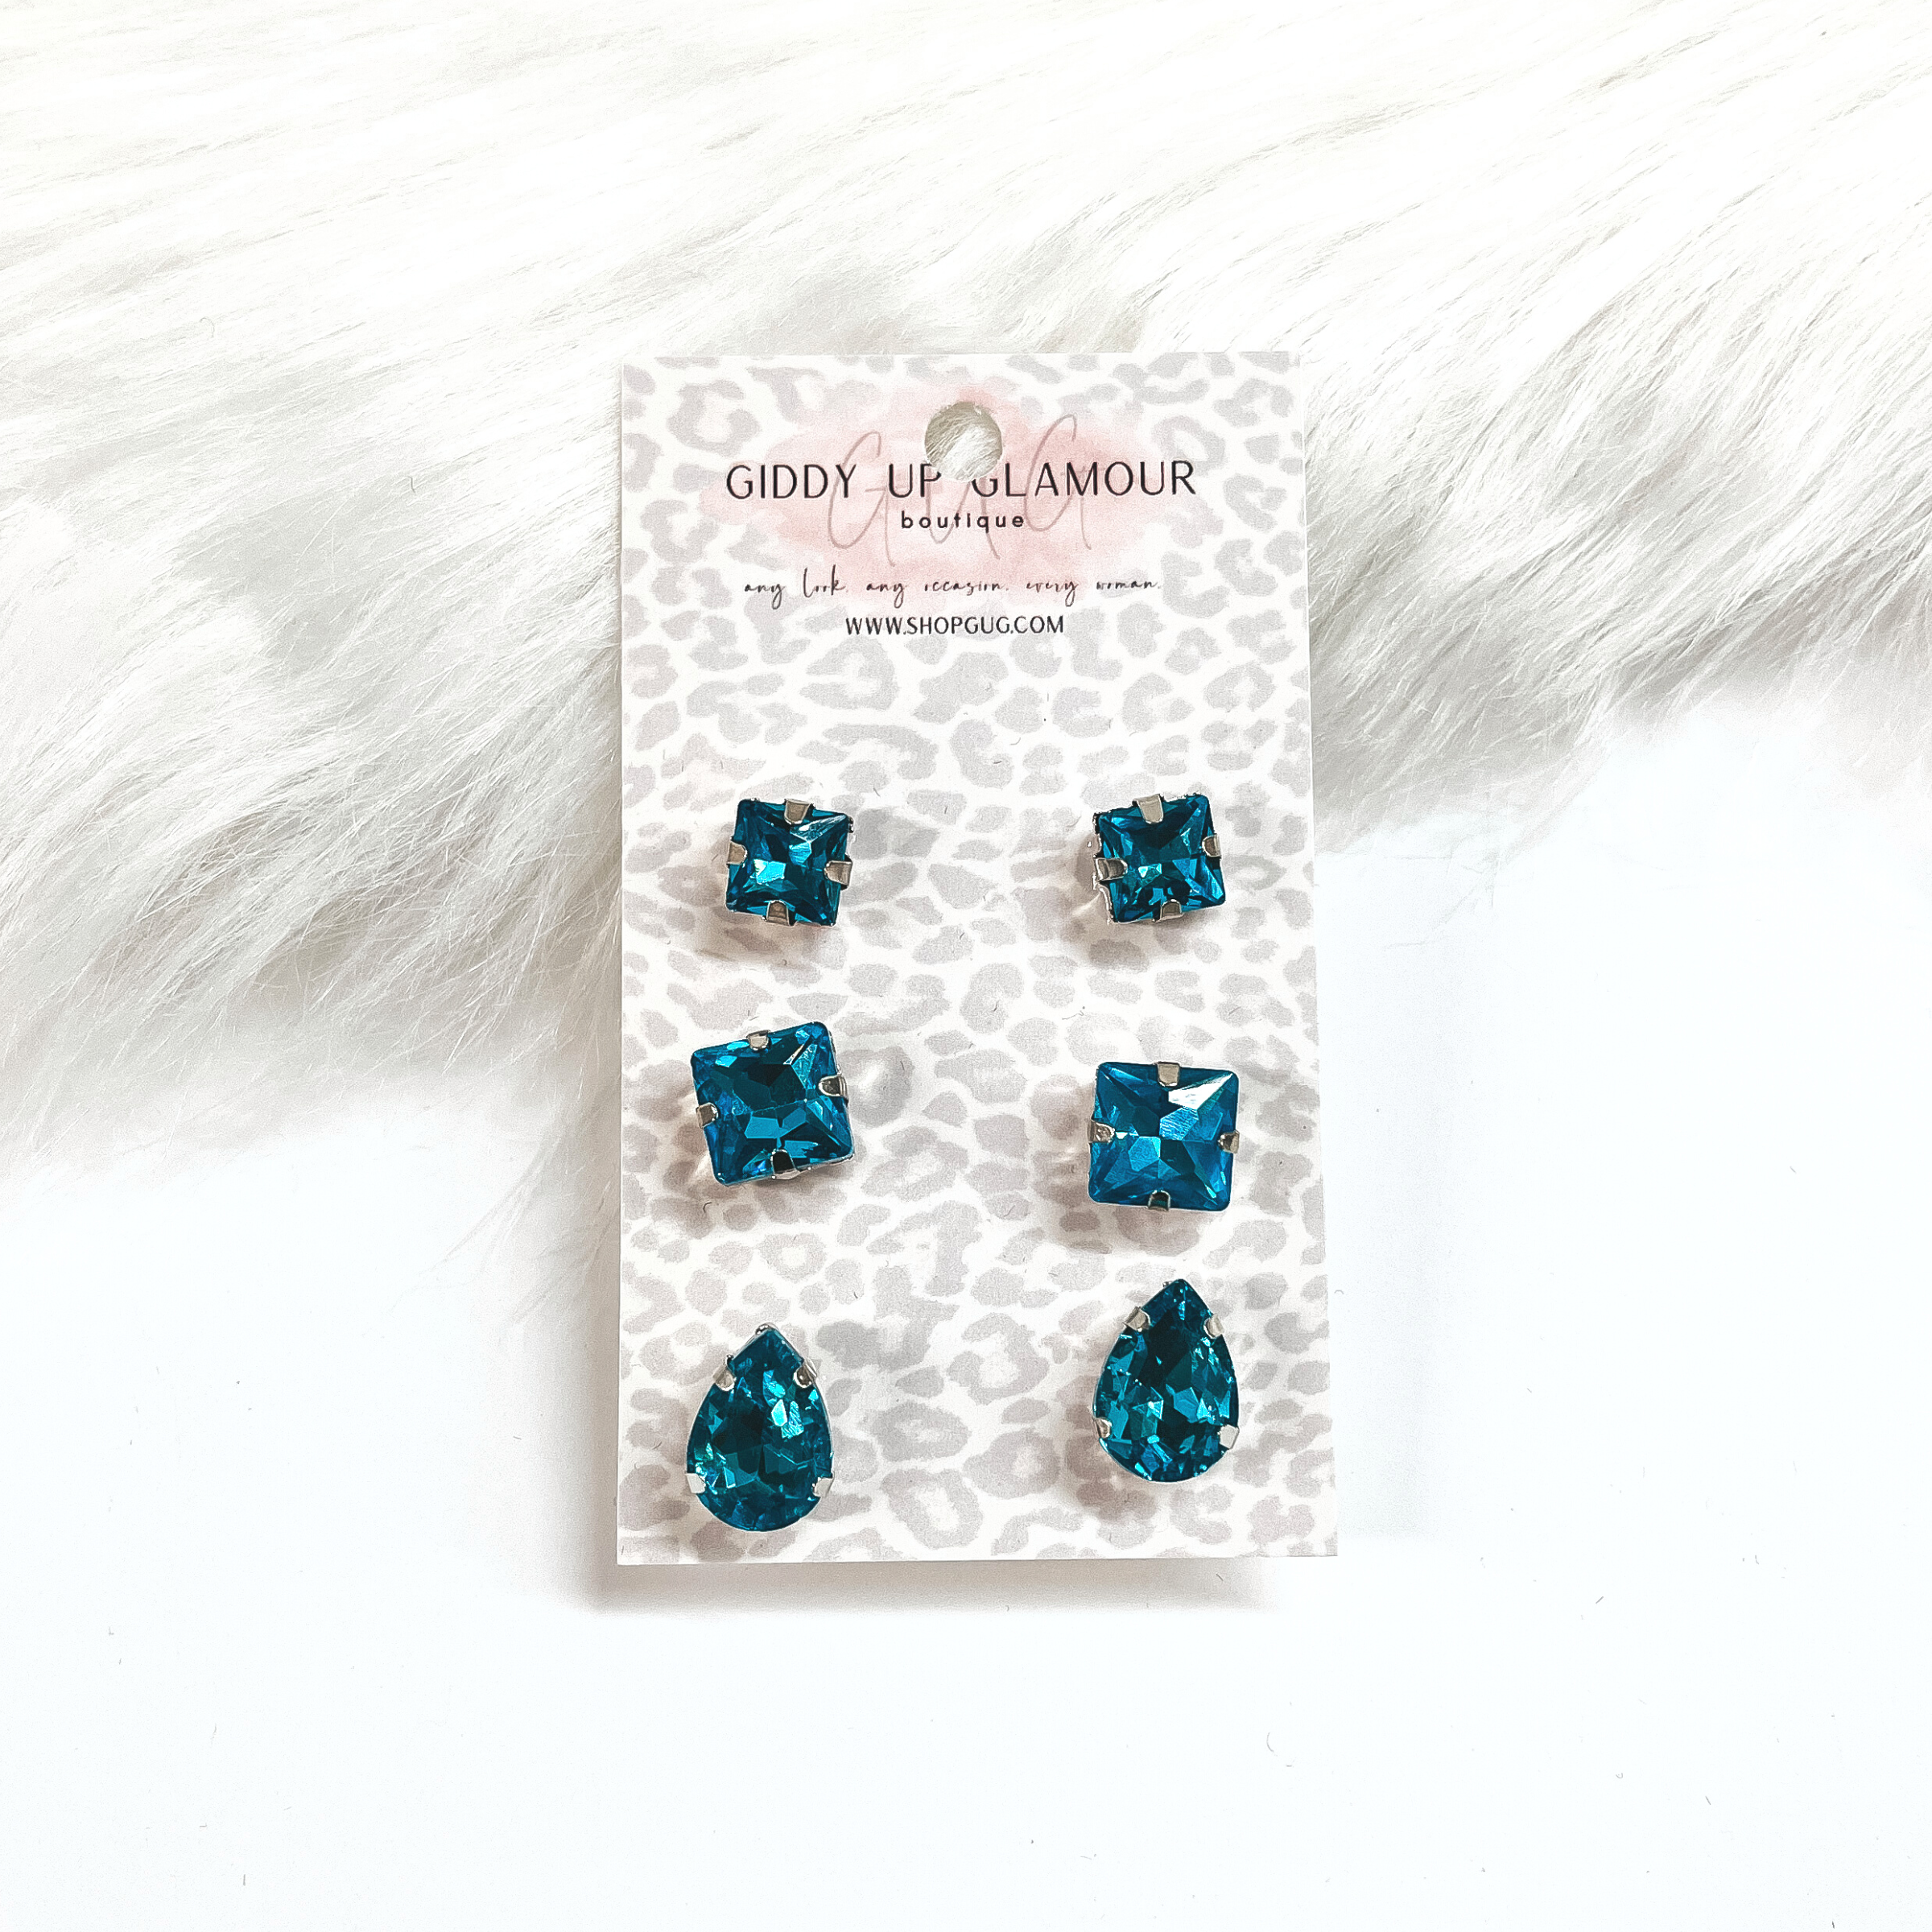 Buy 3 for $10 | Set of Three | Faux Crystal Stud Earrings in Silver Tone Setting - Giddy Up Glamour Boutique